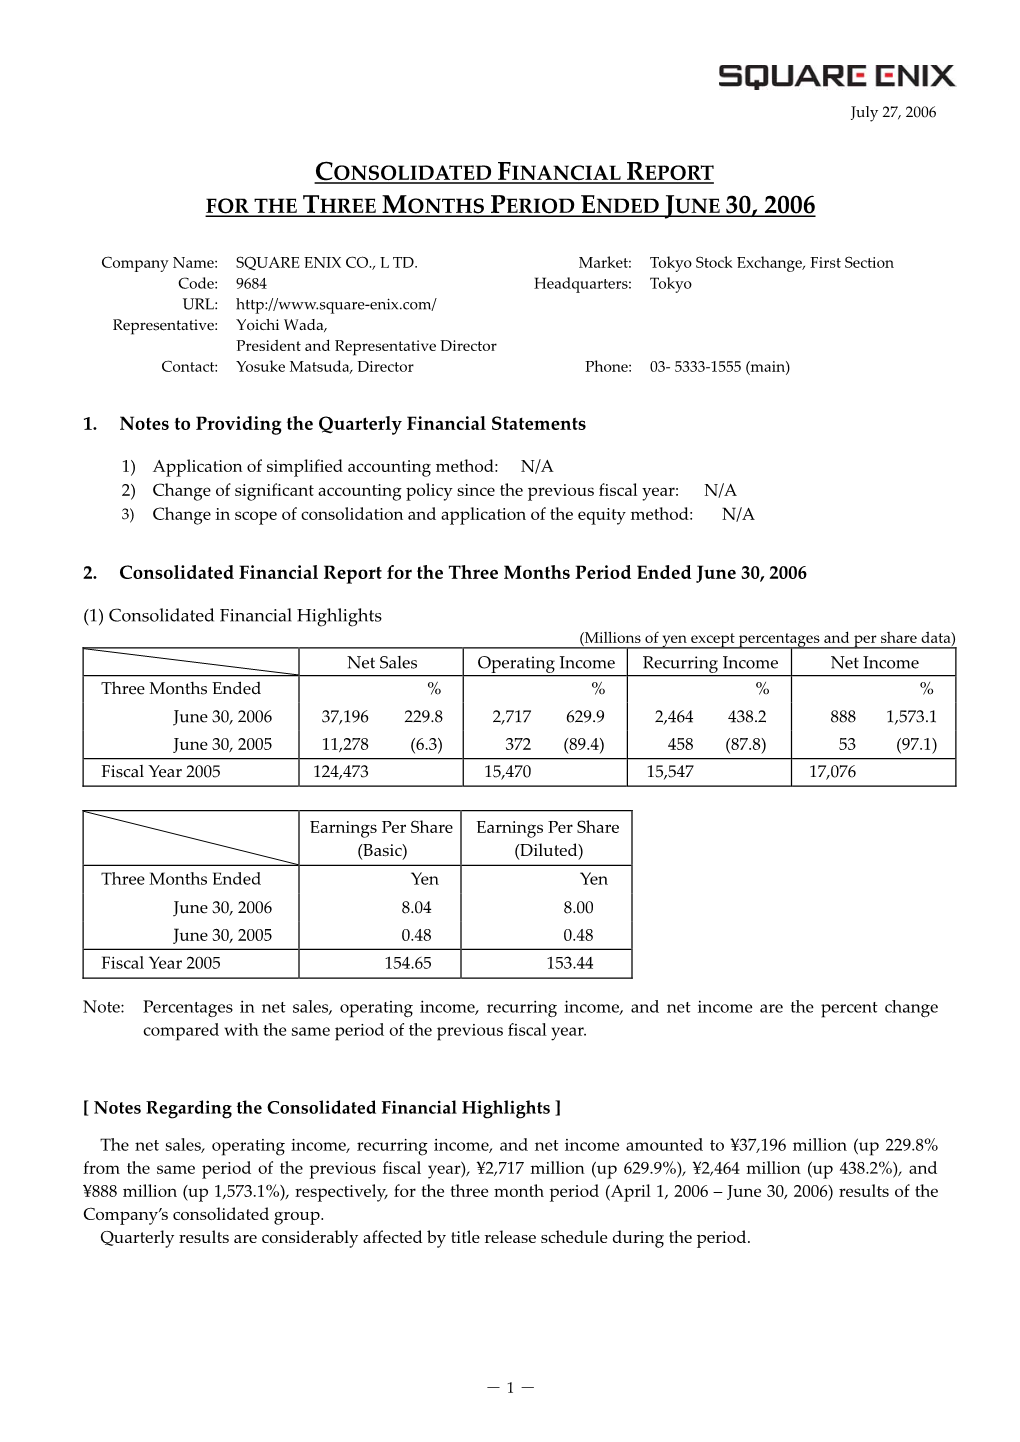 Consolidated Financial Report for the Three Months Period Ended June 30, 2006